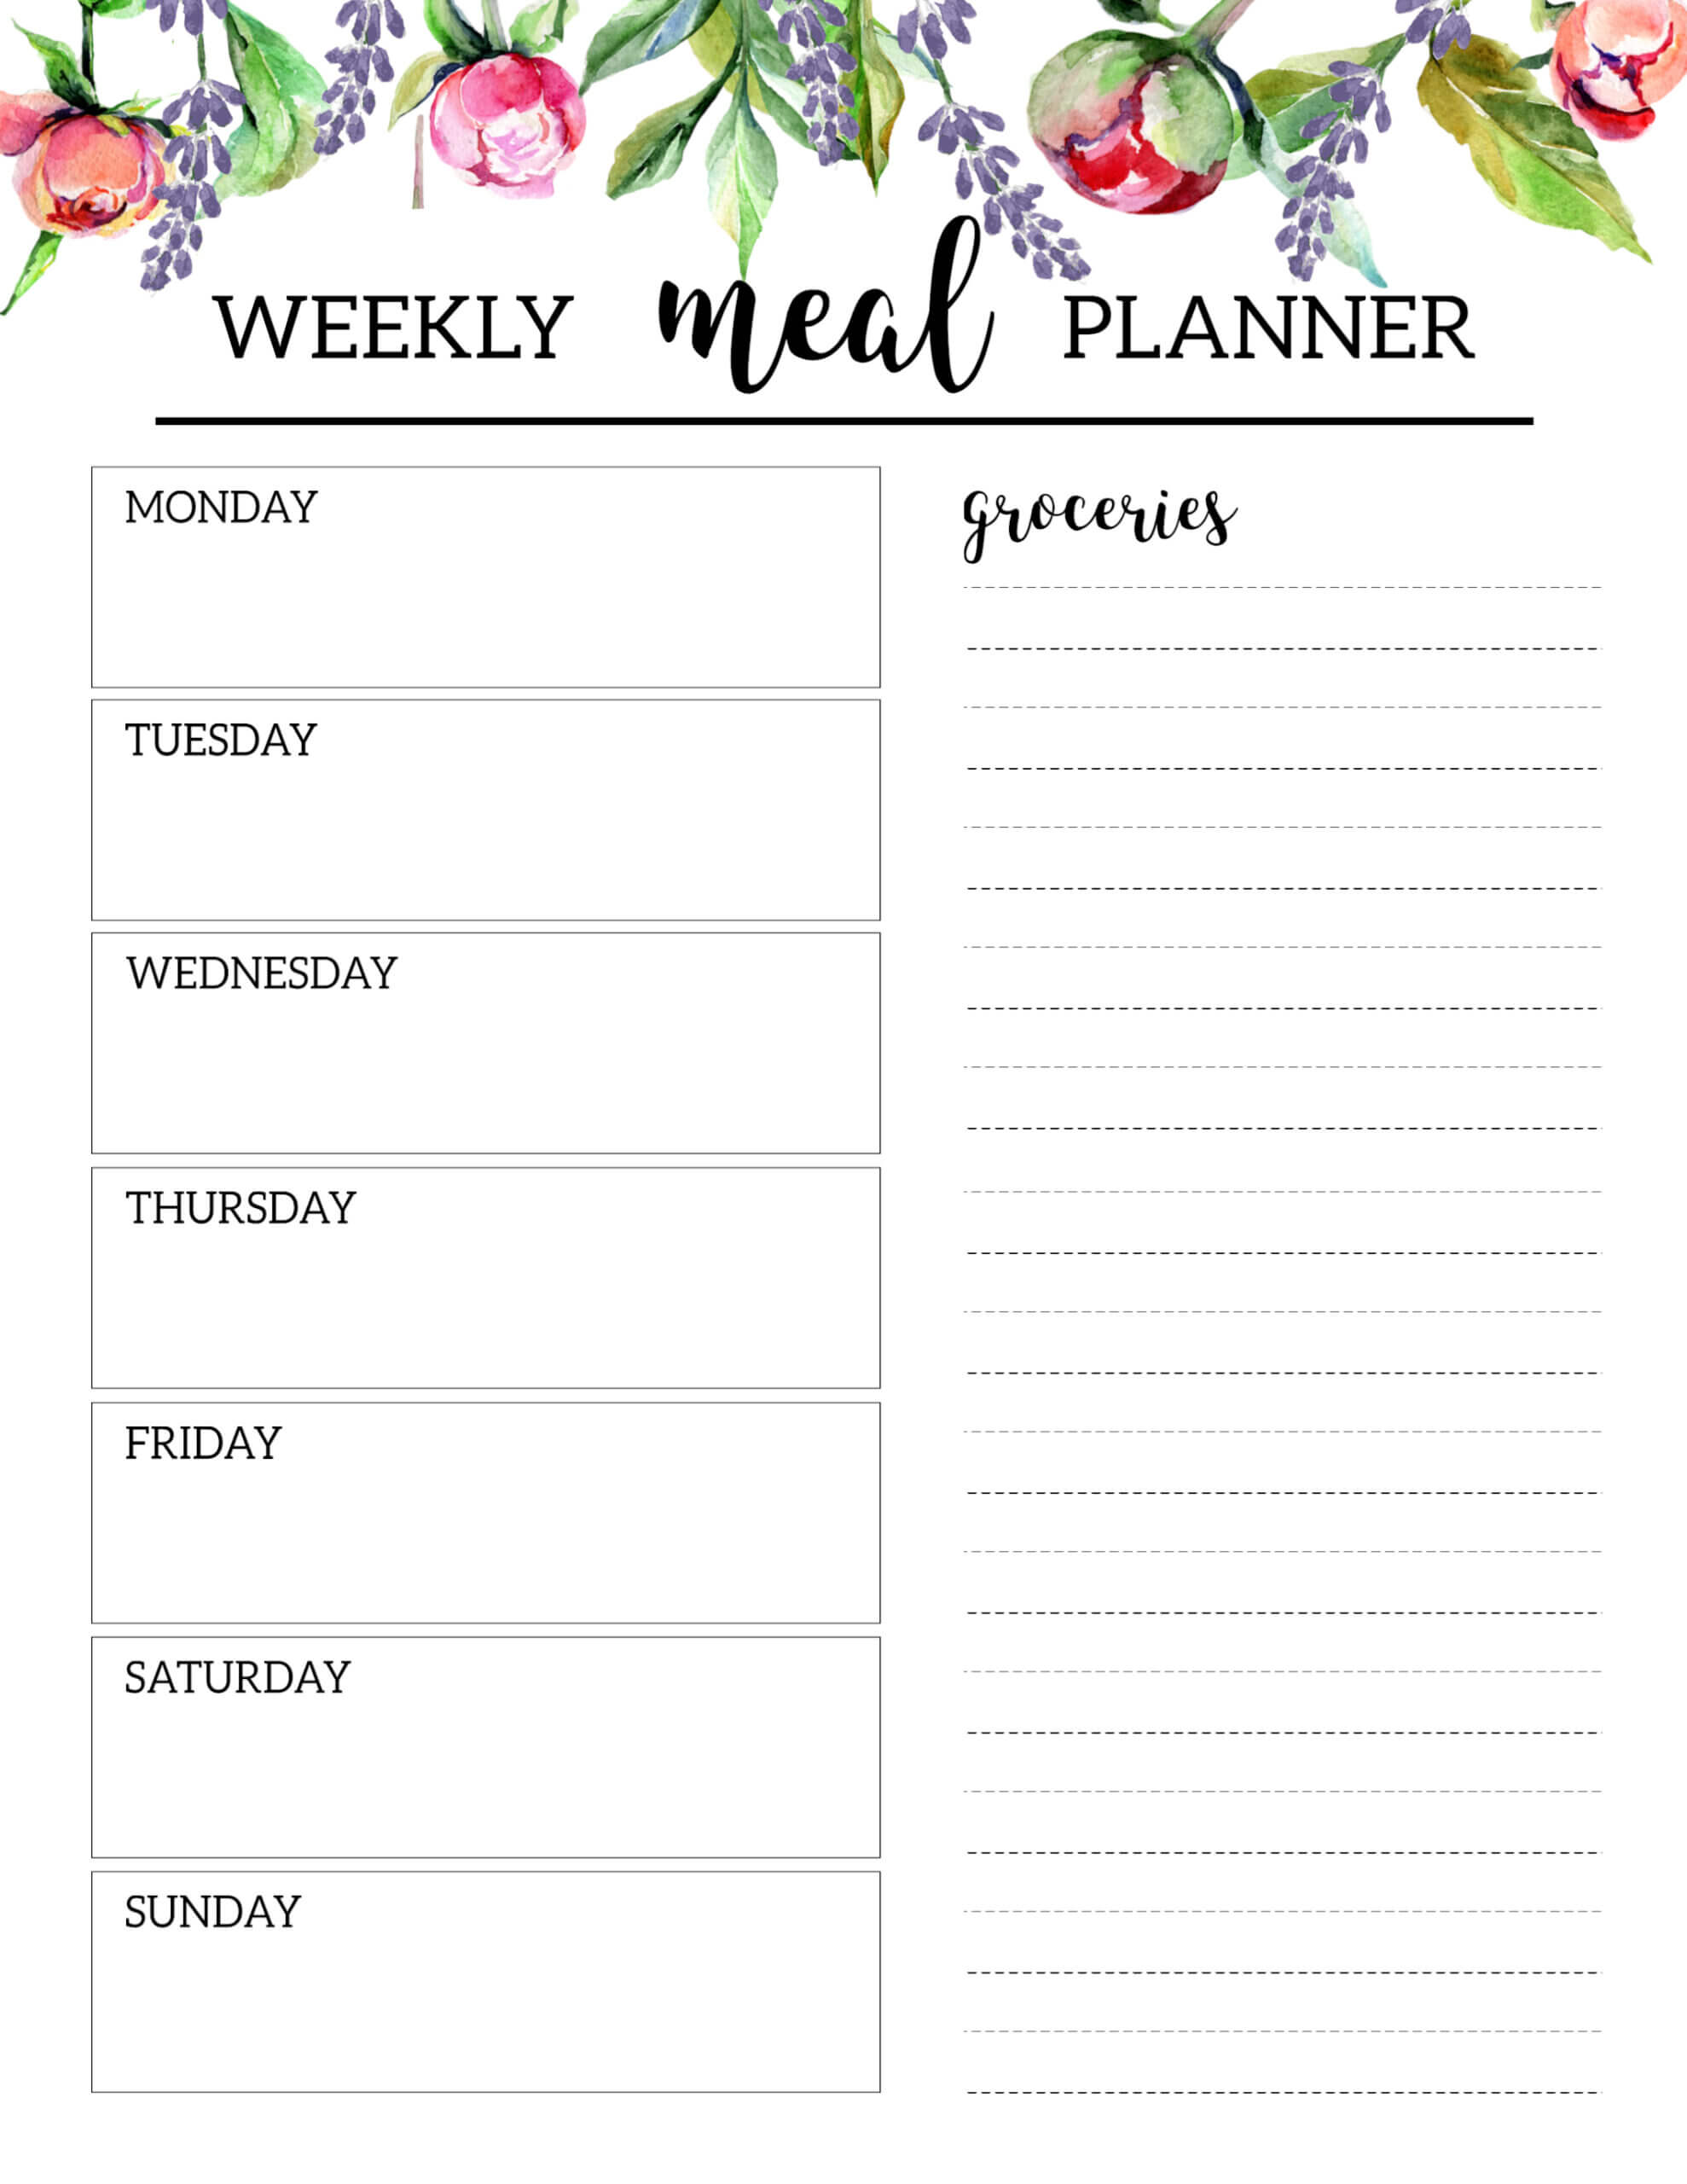 Floral Free Printable Meal Planner Template - Paper Trail Design In Camping Menu Planner Template